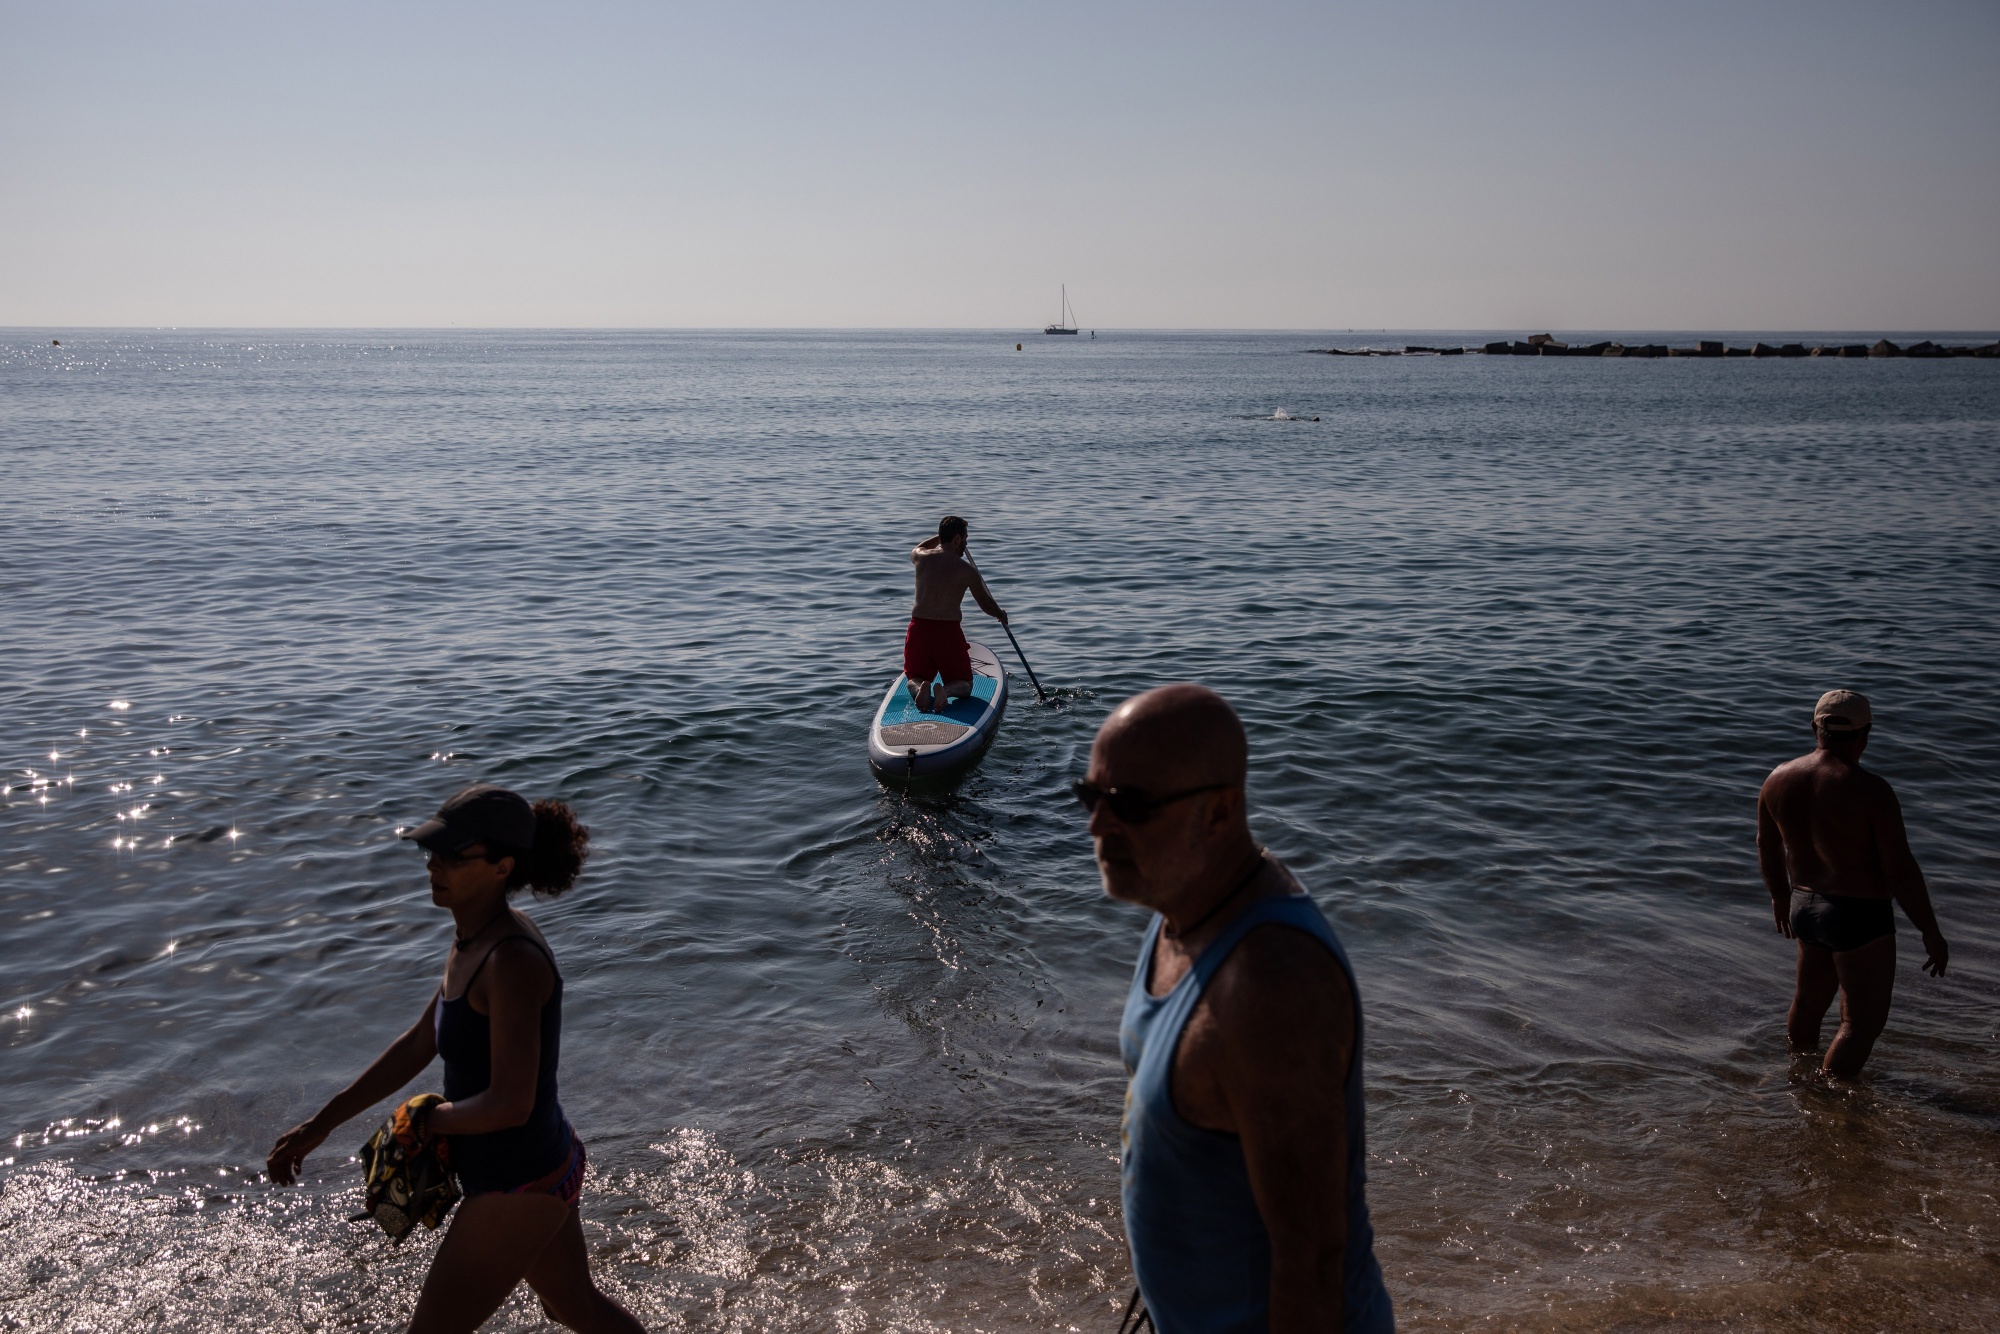 Spain's Tourism Revival Underway With Packed Beaches